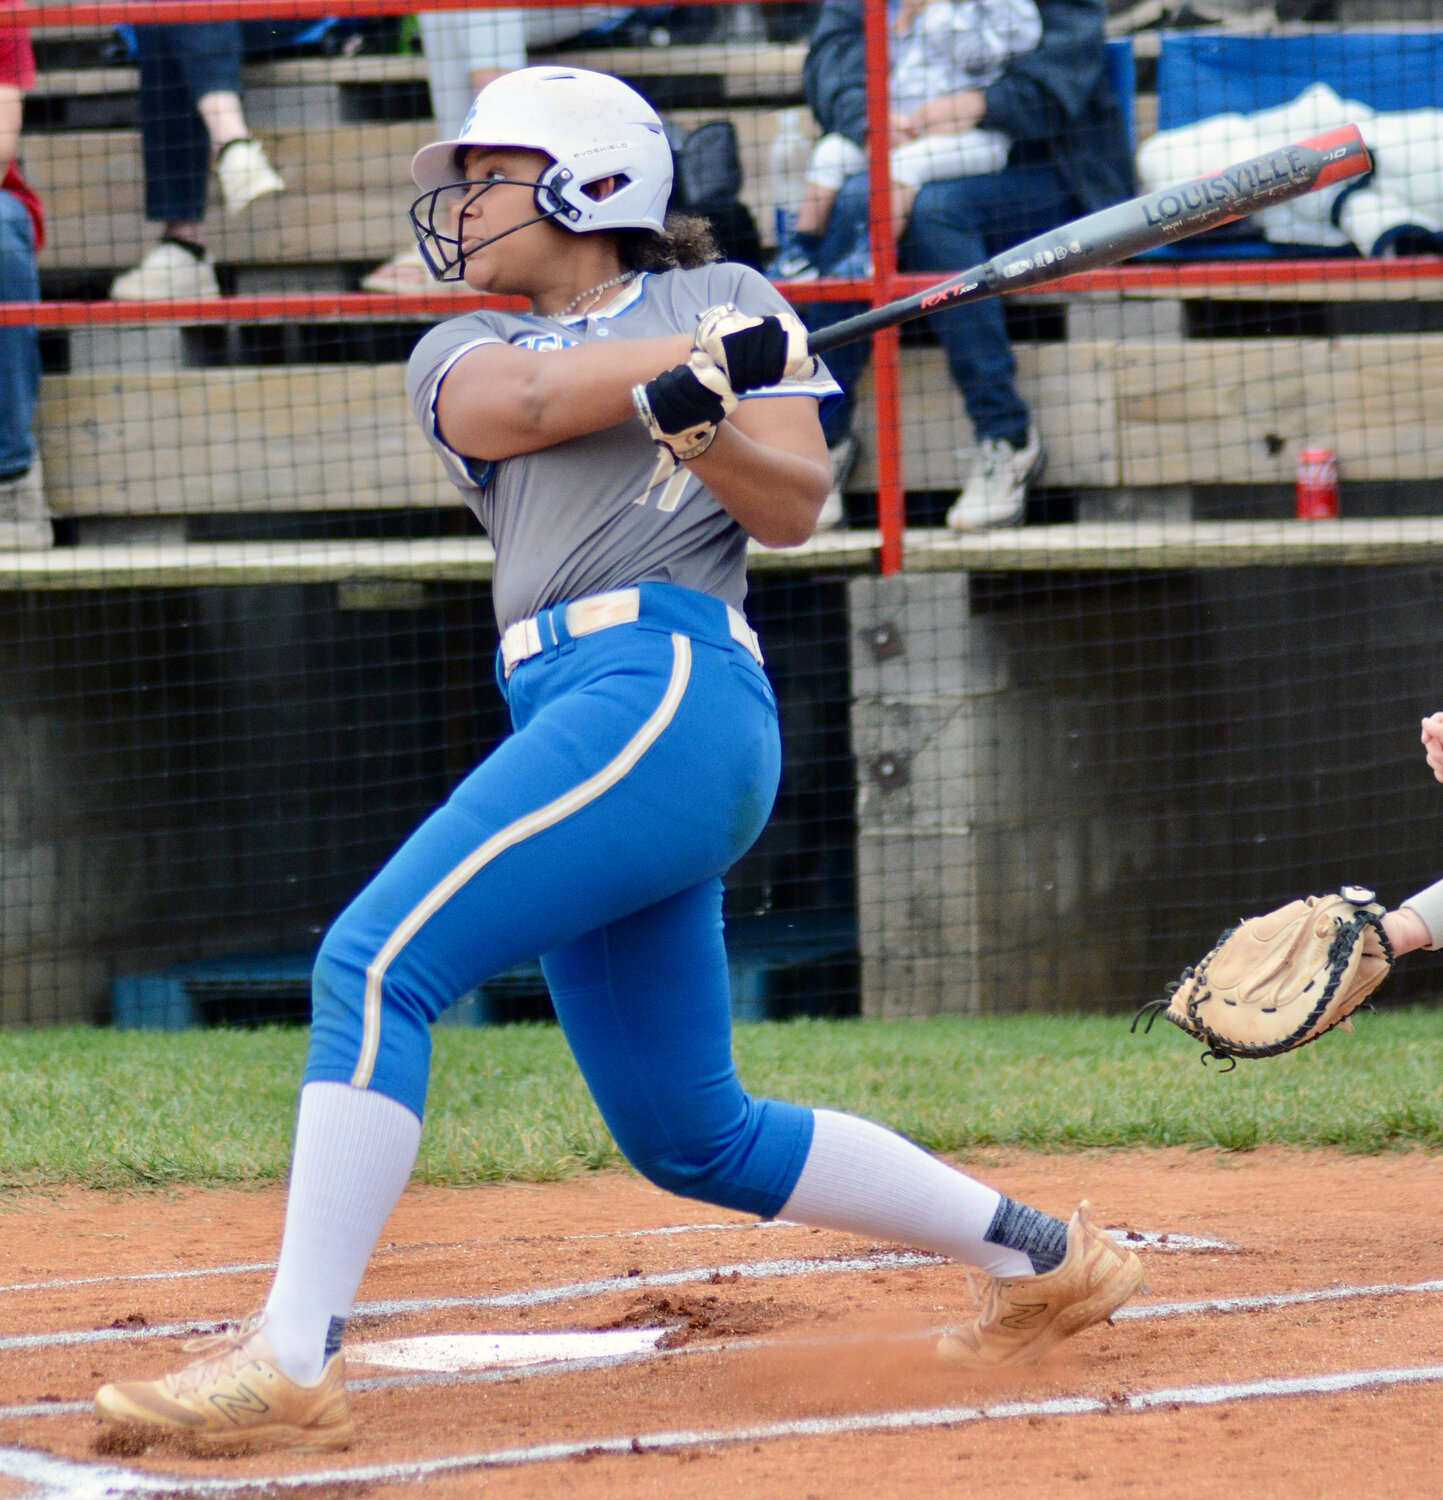 Golden Eaglette Lilly Brown has had an explosive District 6 4-A tournament thus far including a grand slam and another home run Friday night against Franklin County.